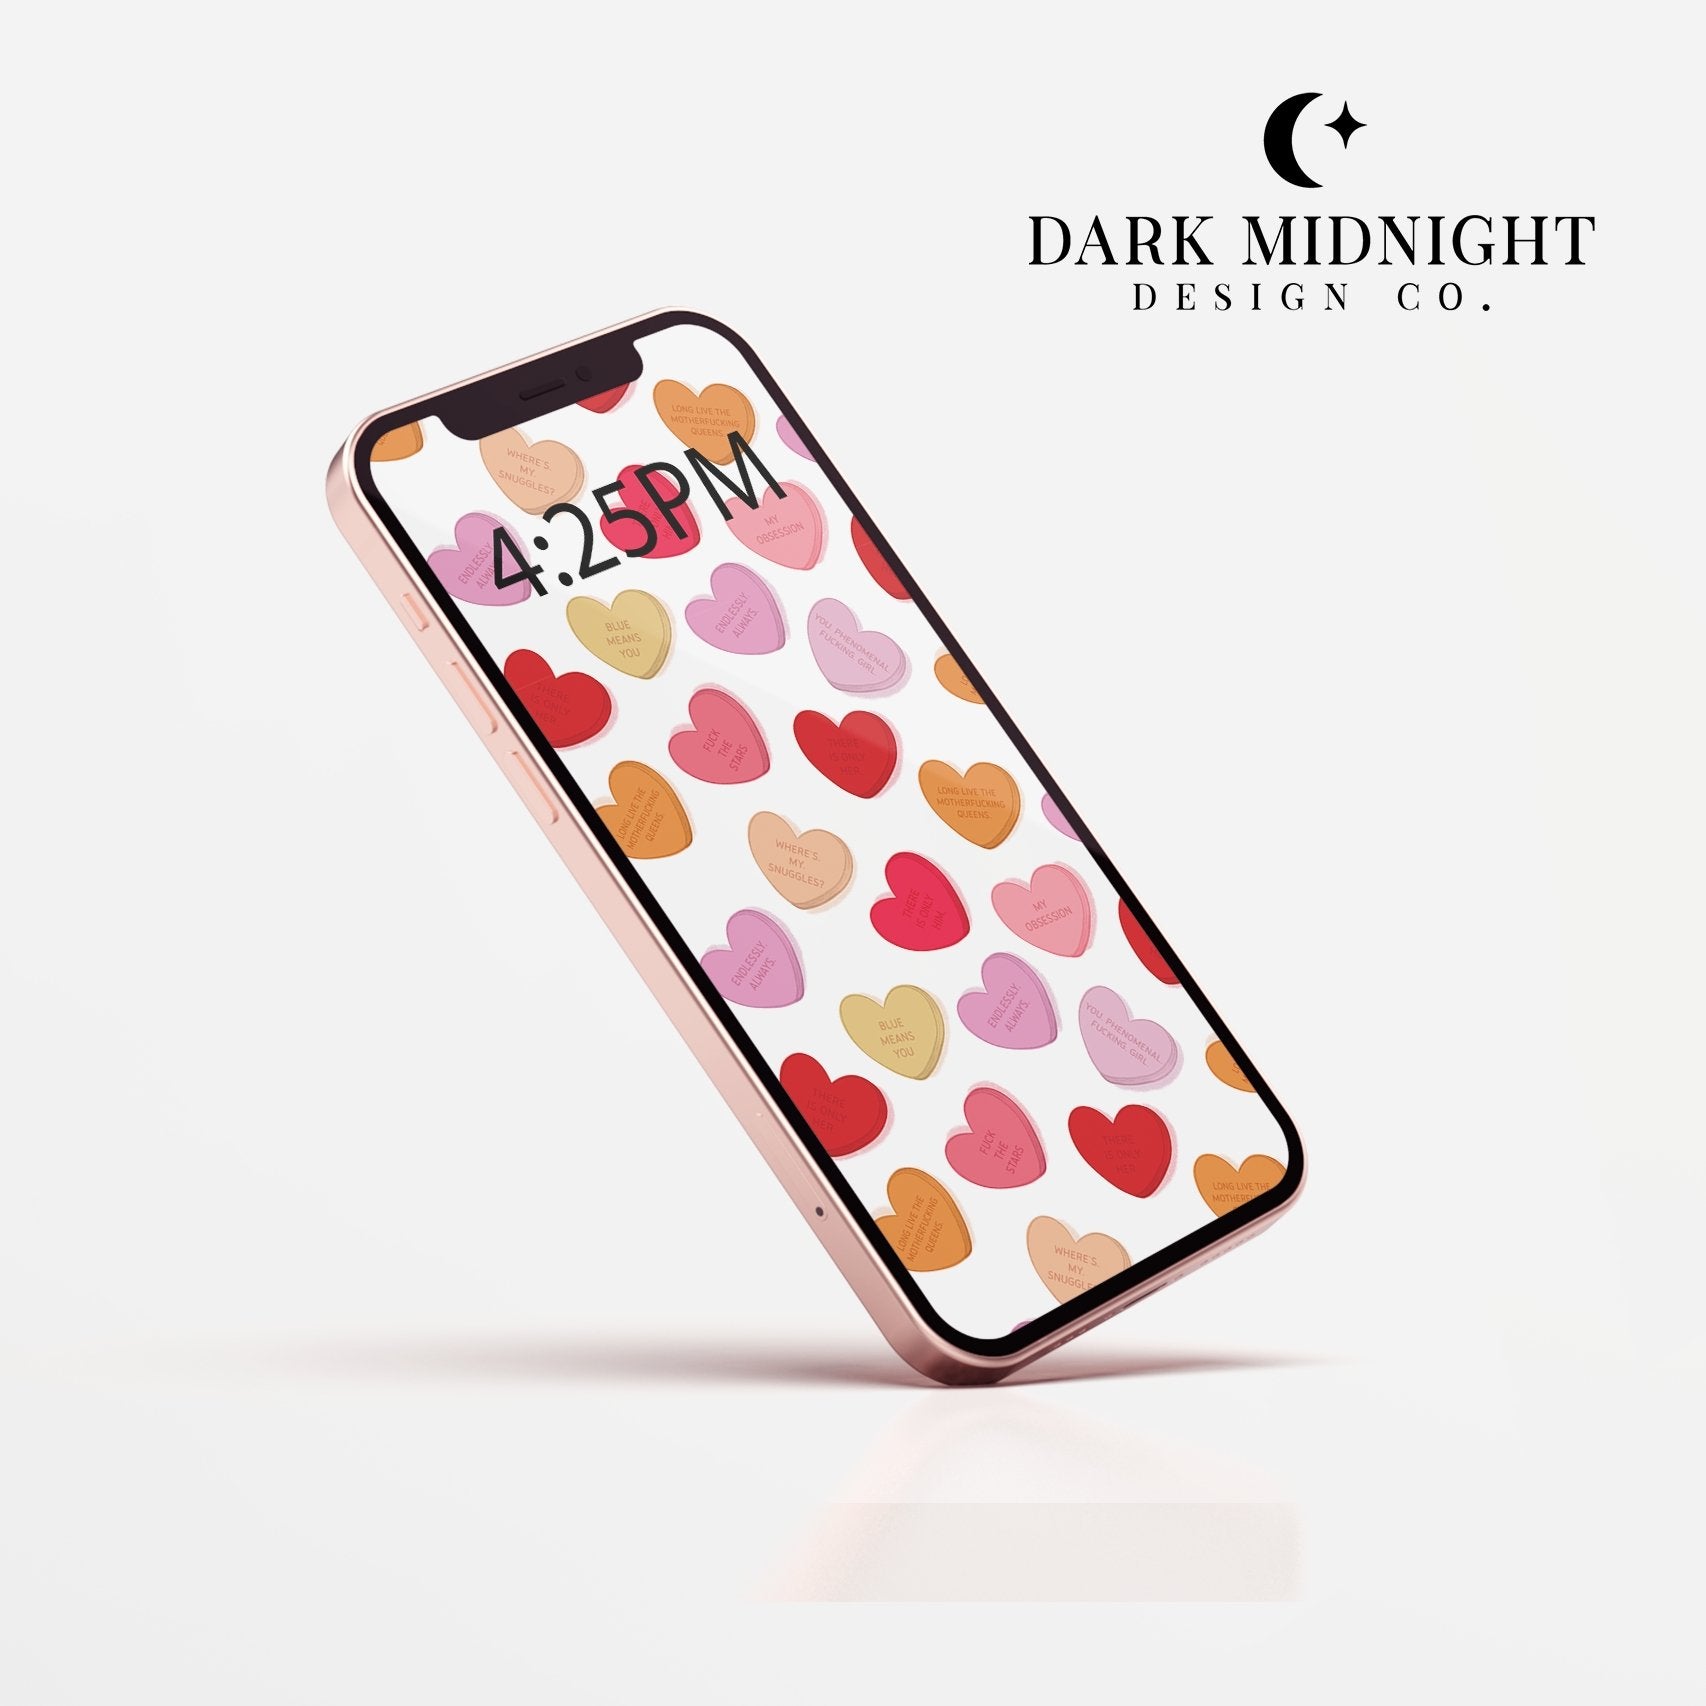 Candy Hearts - Officially Licensed Zodiac Academy Phone Wallpaper - Dark Midnight Design Co